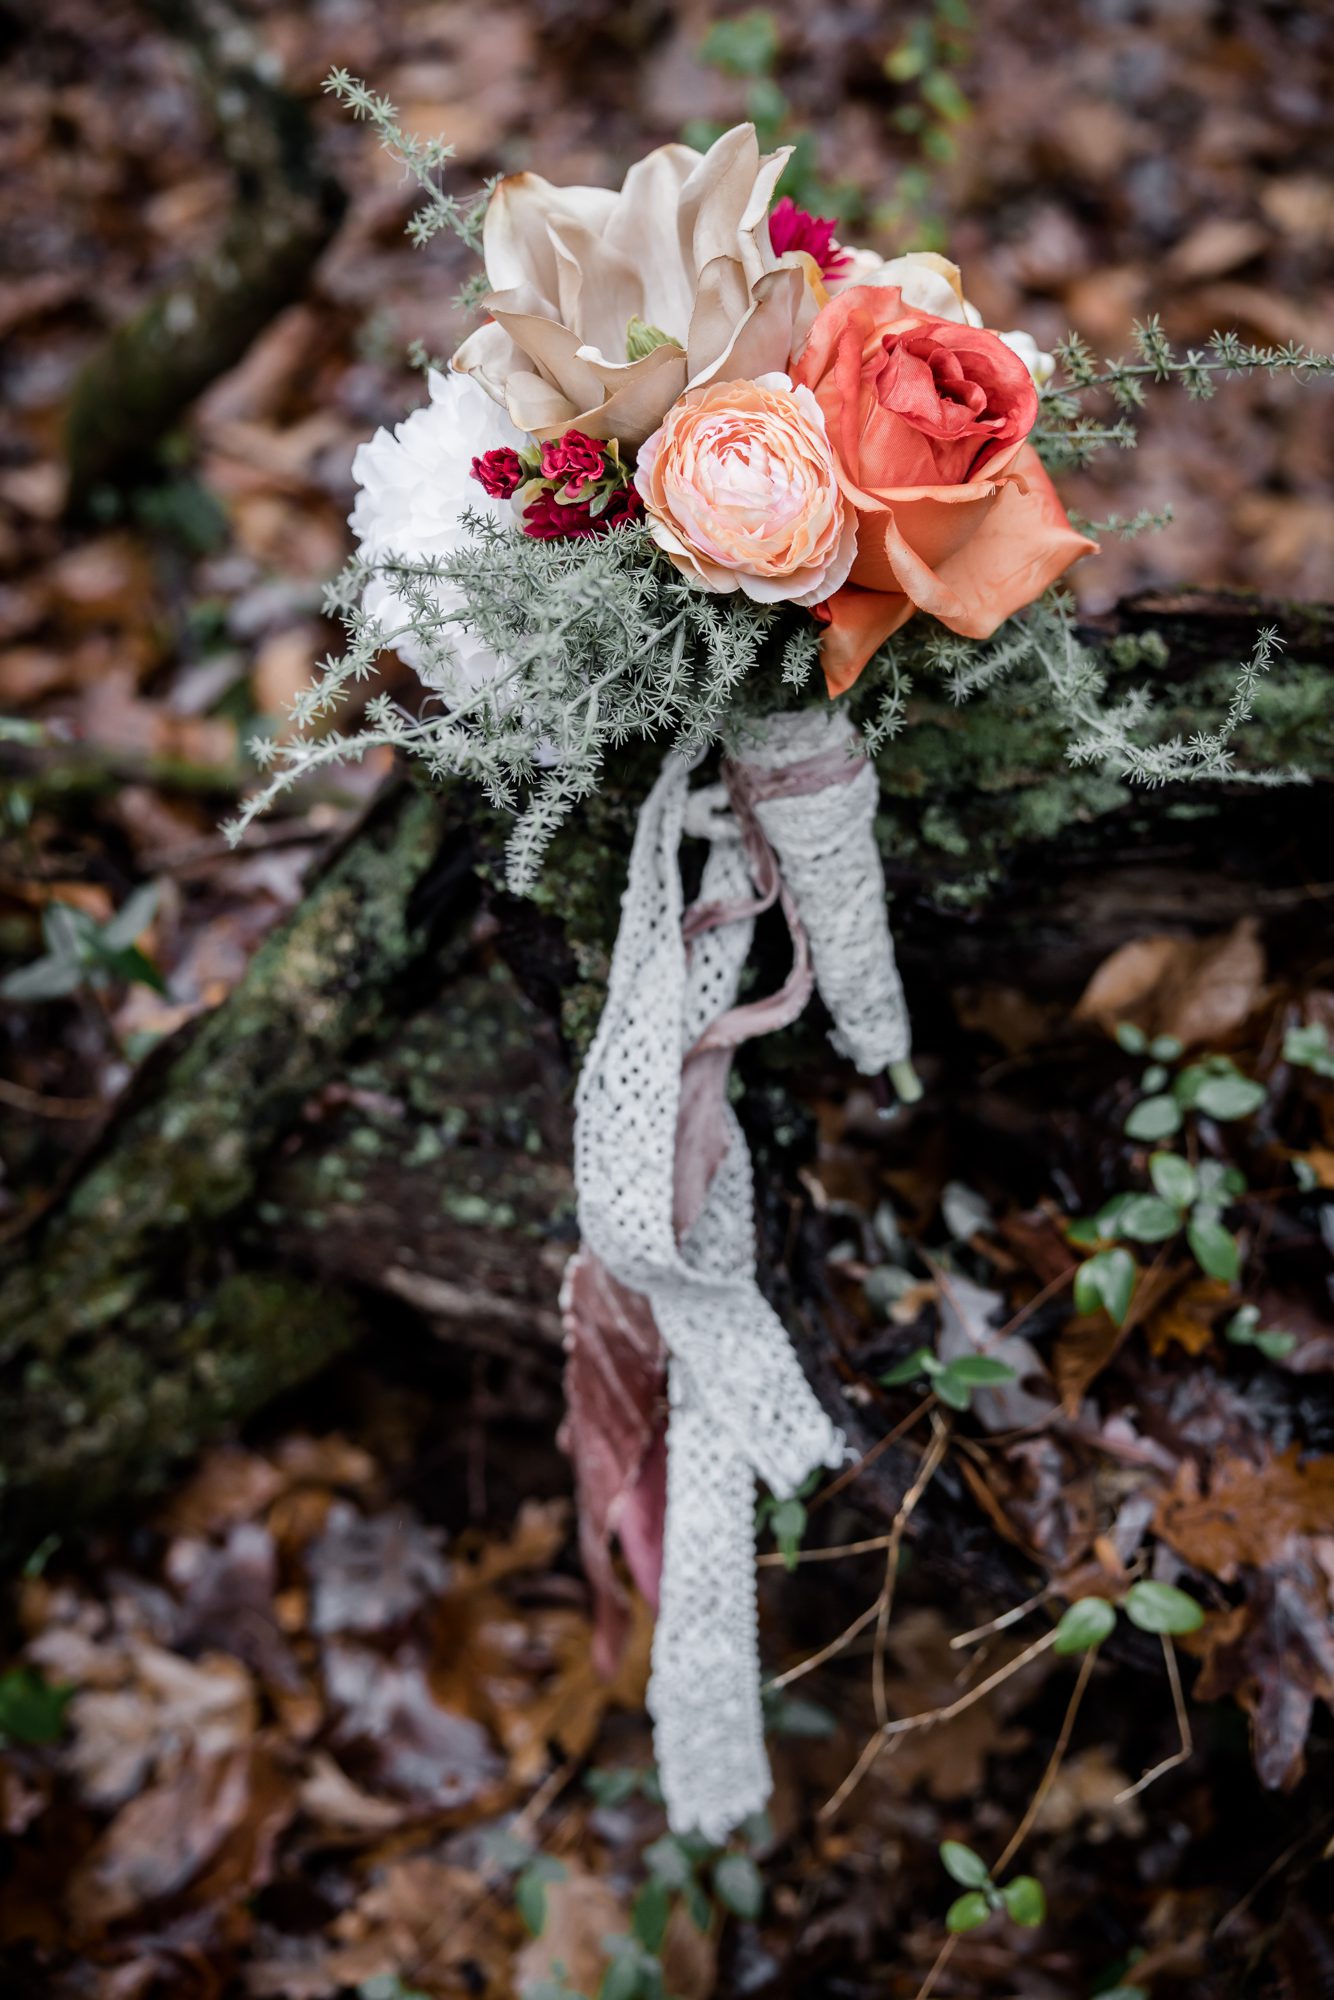 Chilly November Elopement